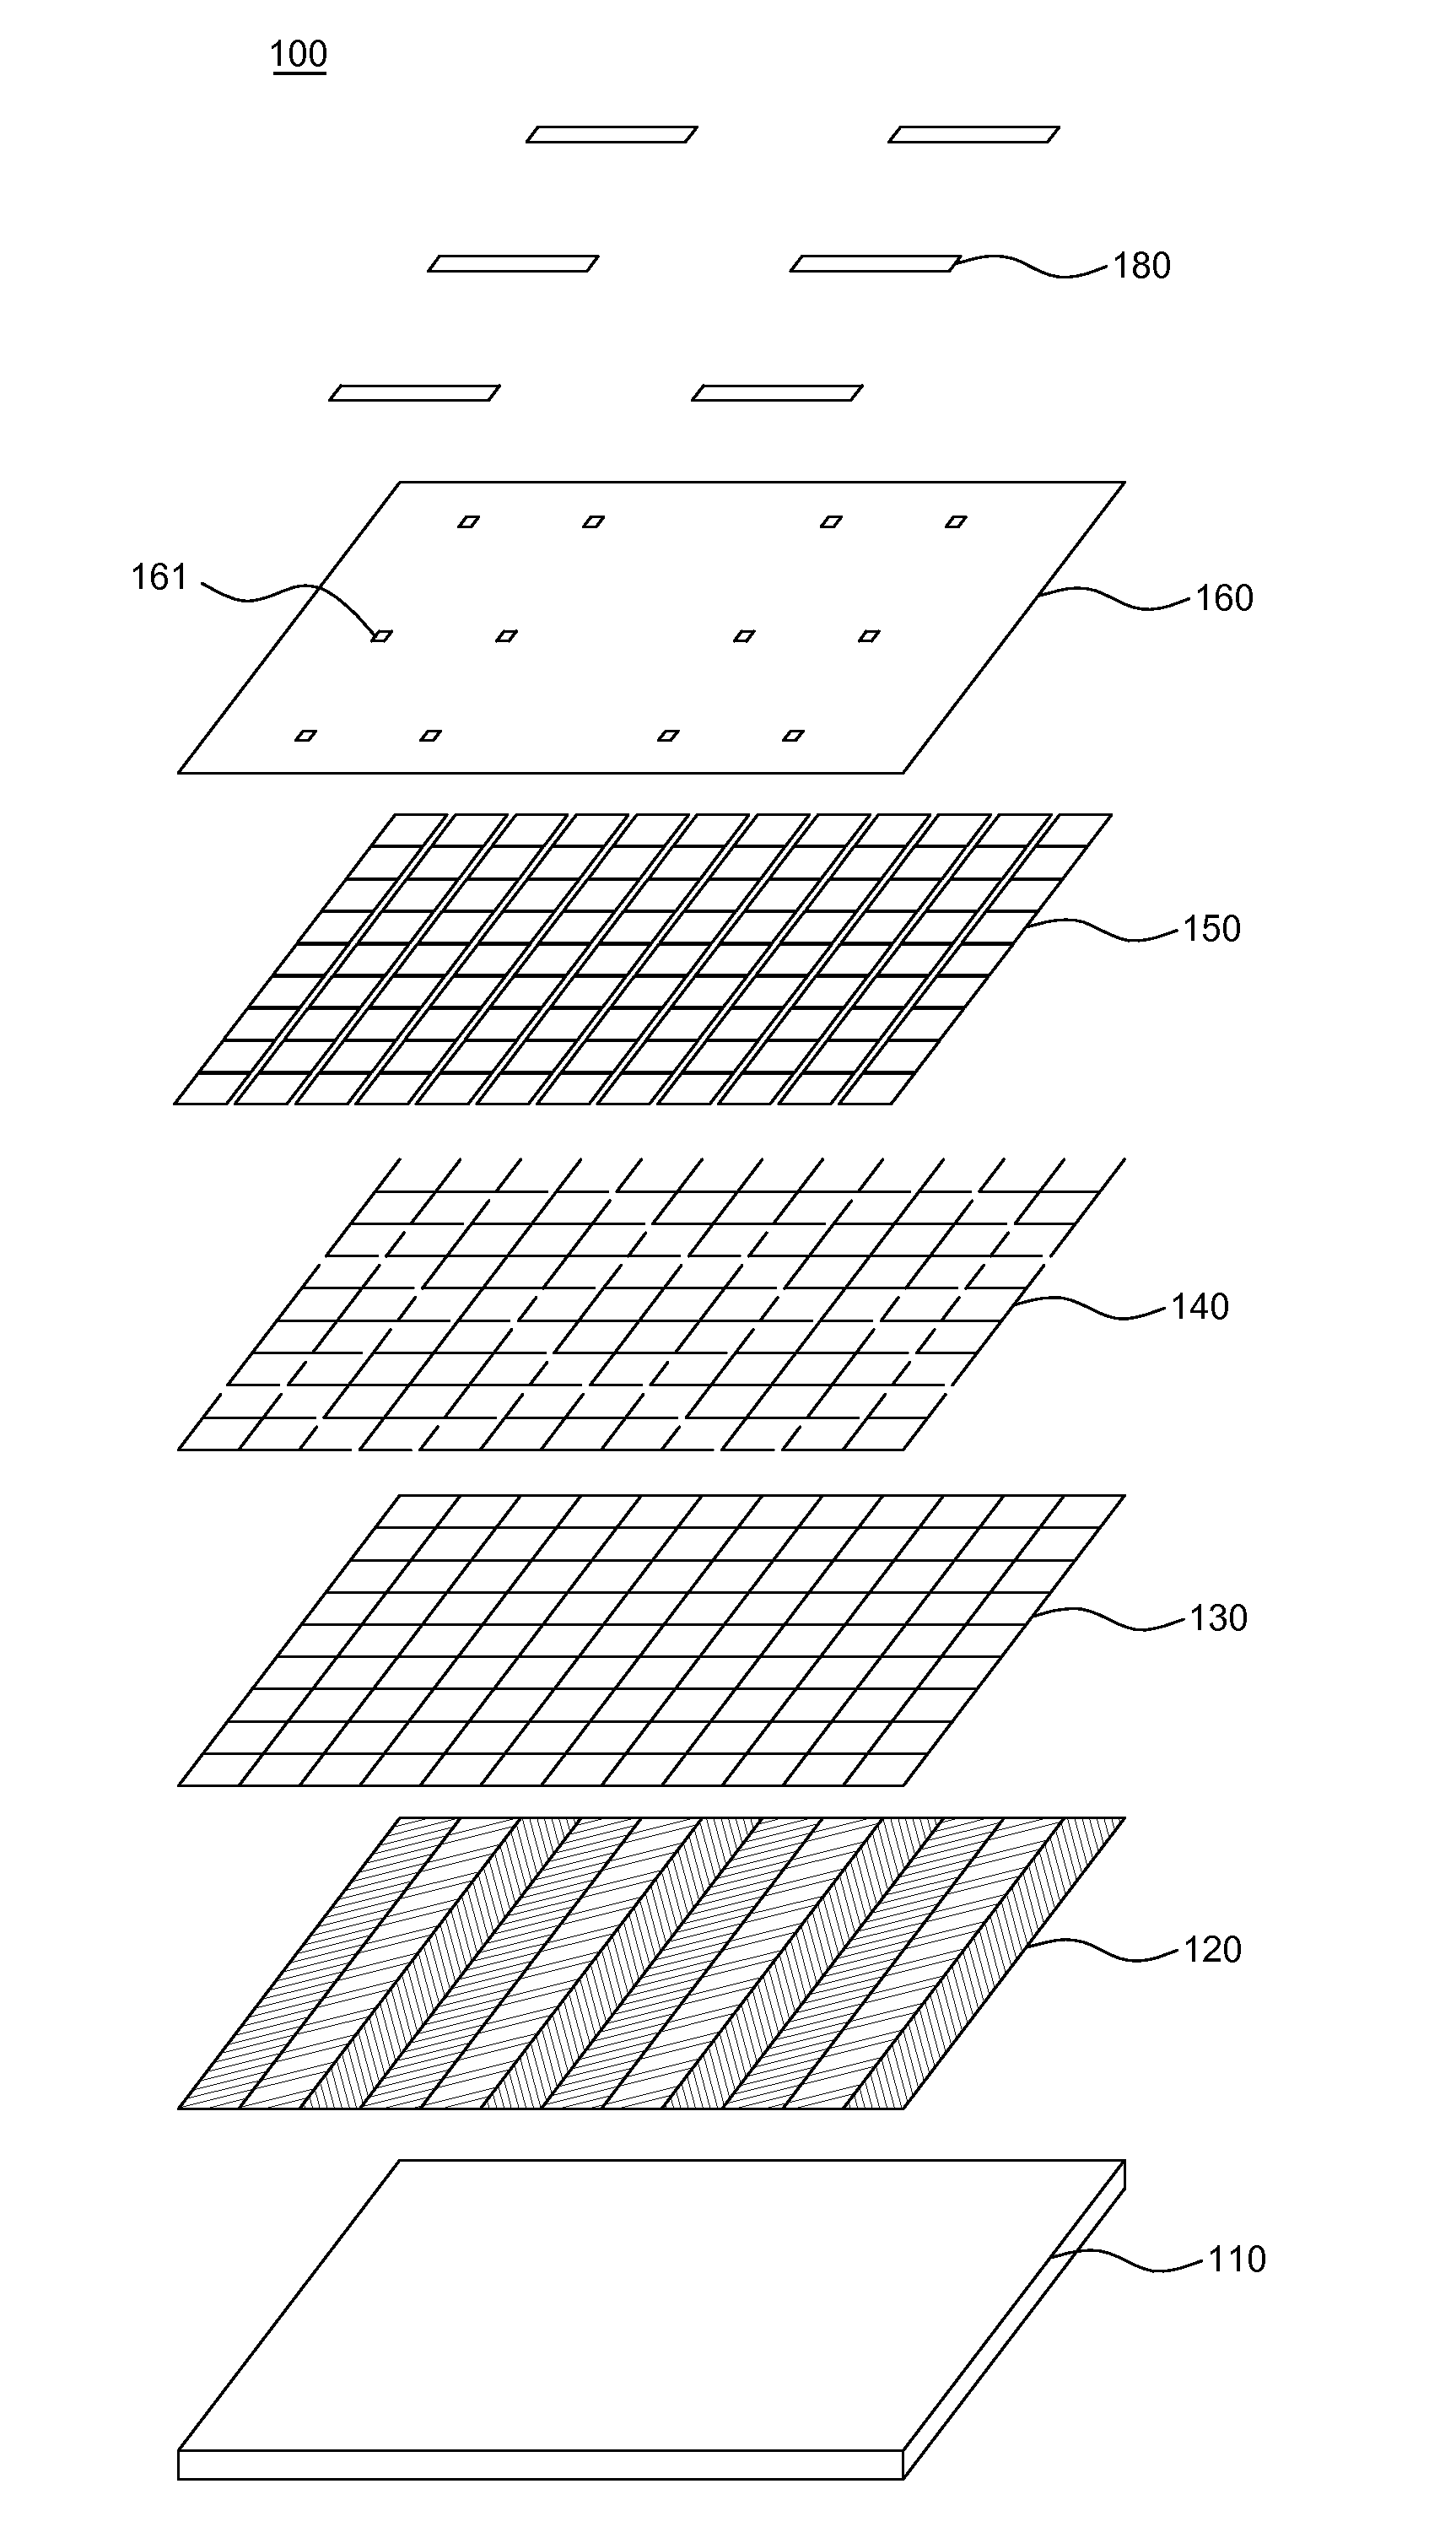 Touch-sensitive display device